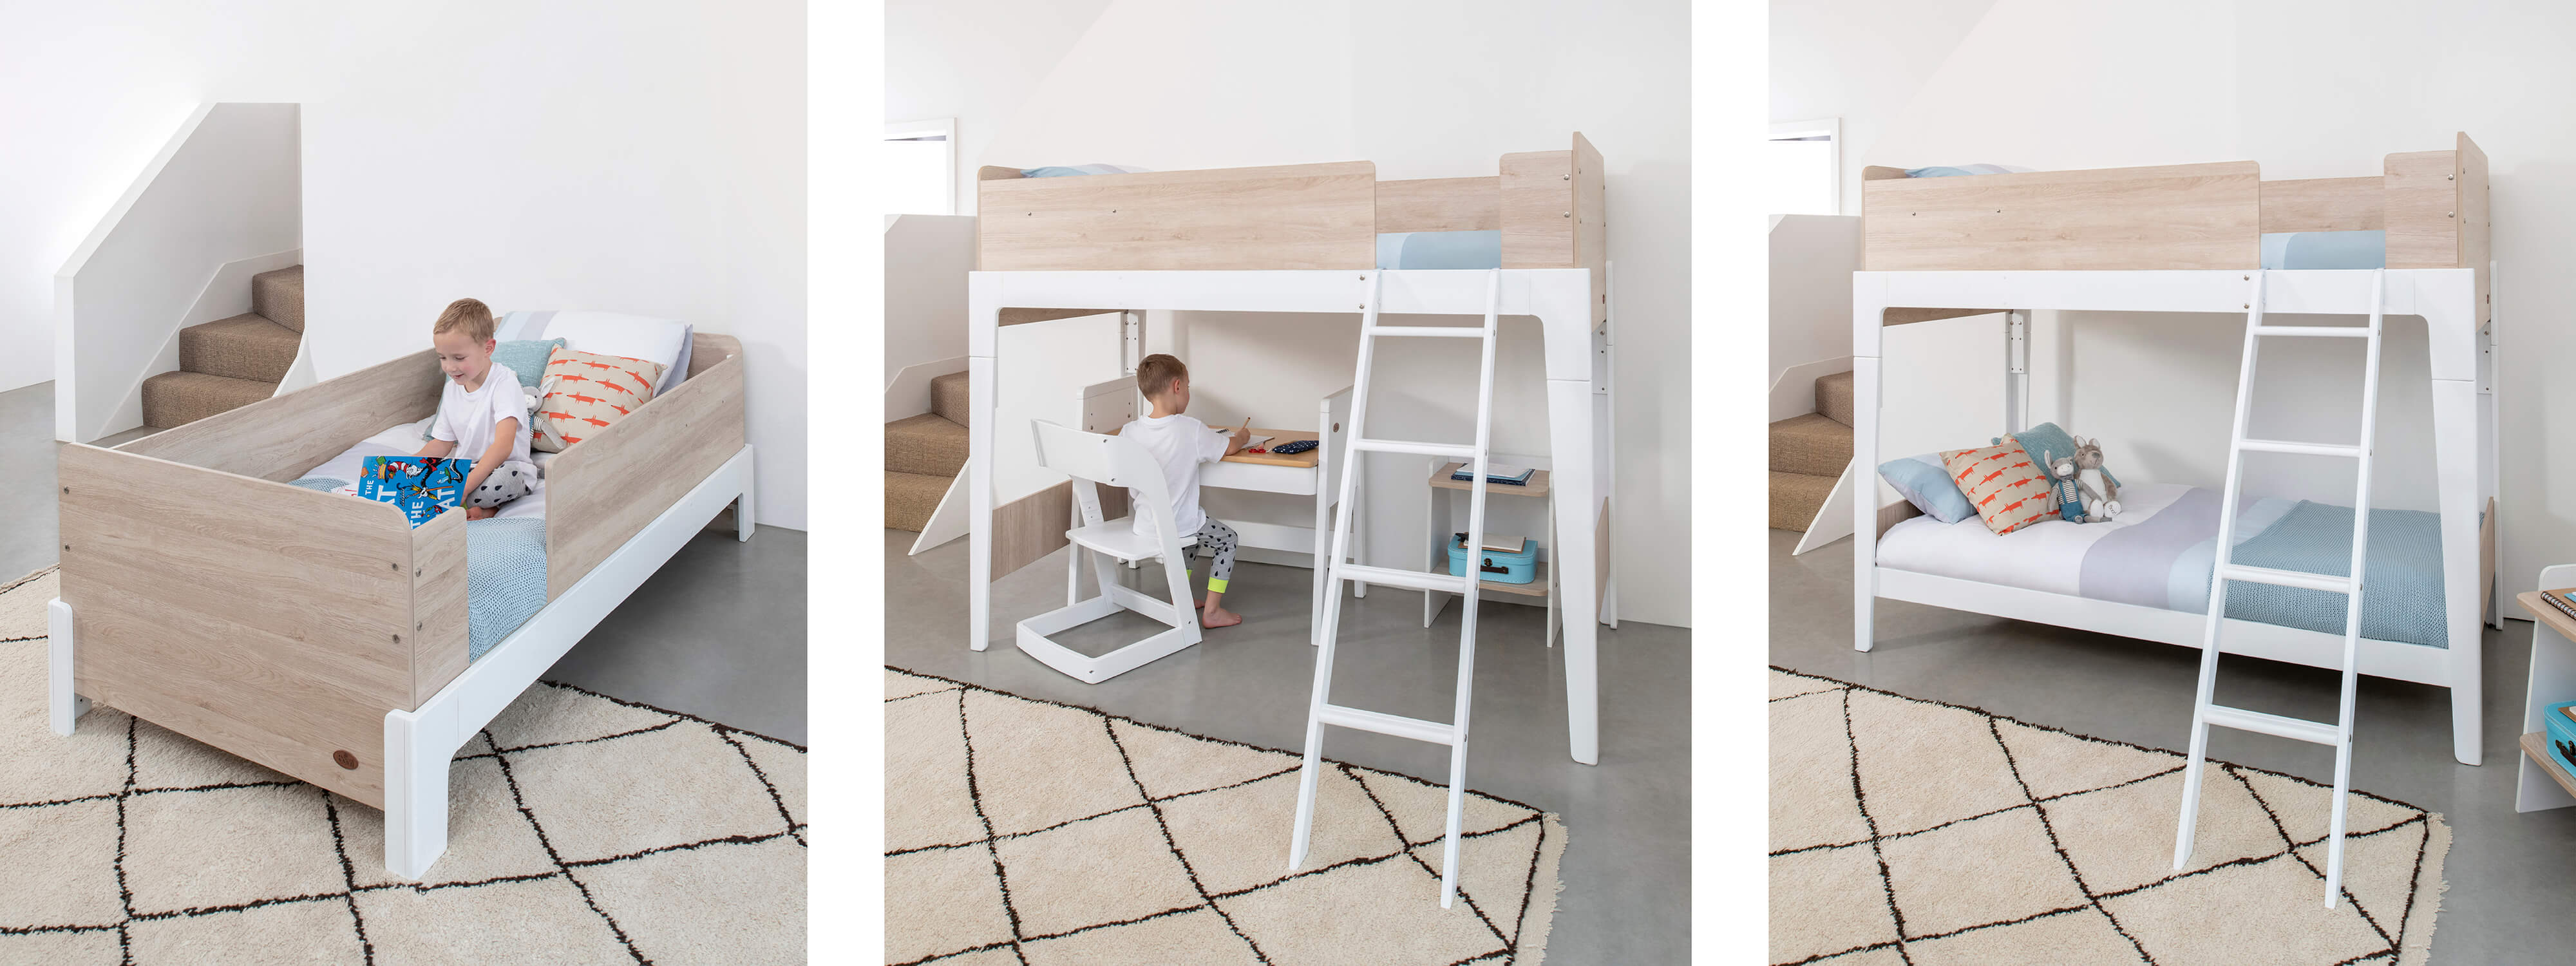 single bed turns into loft bed and bunk bed